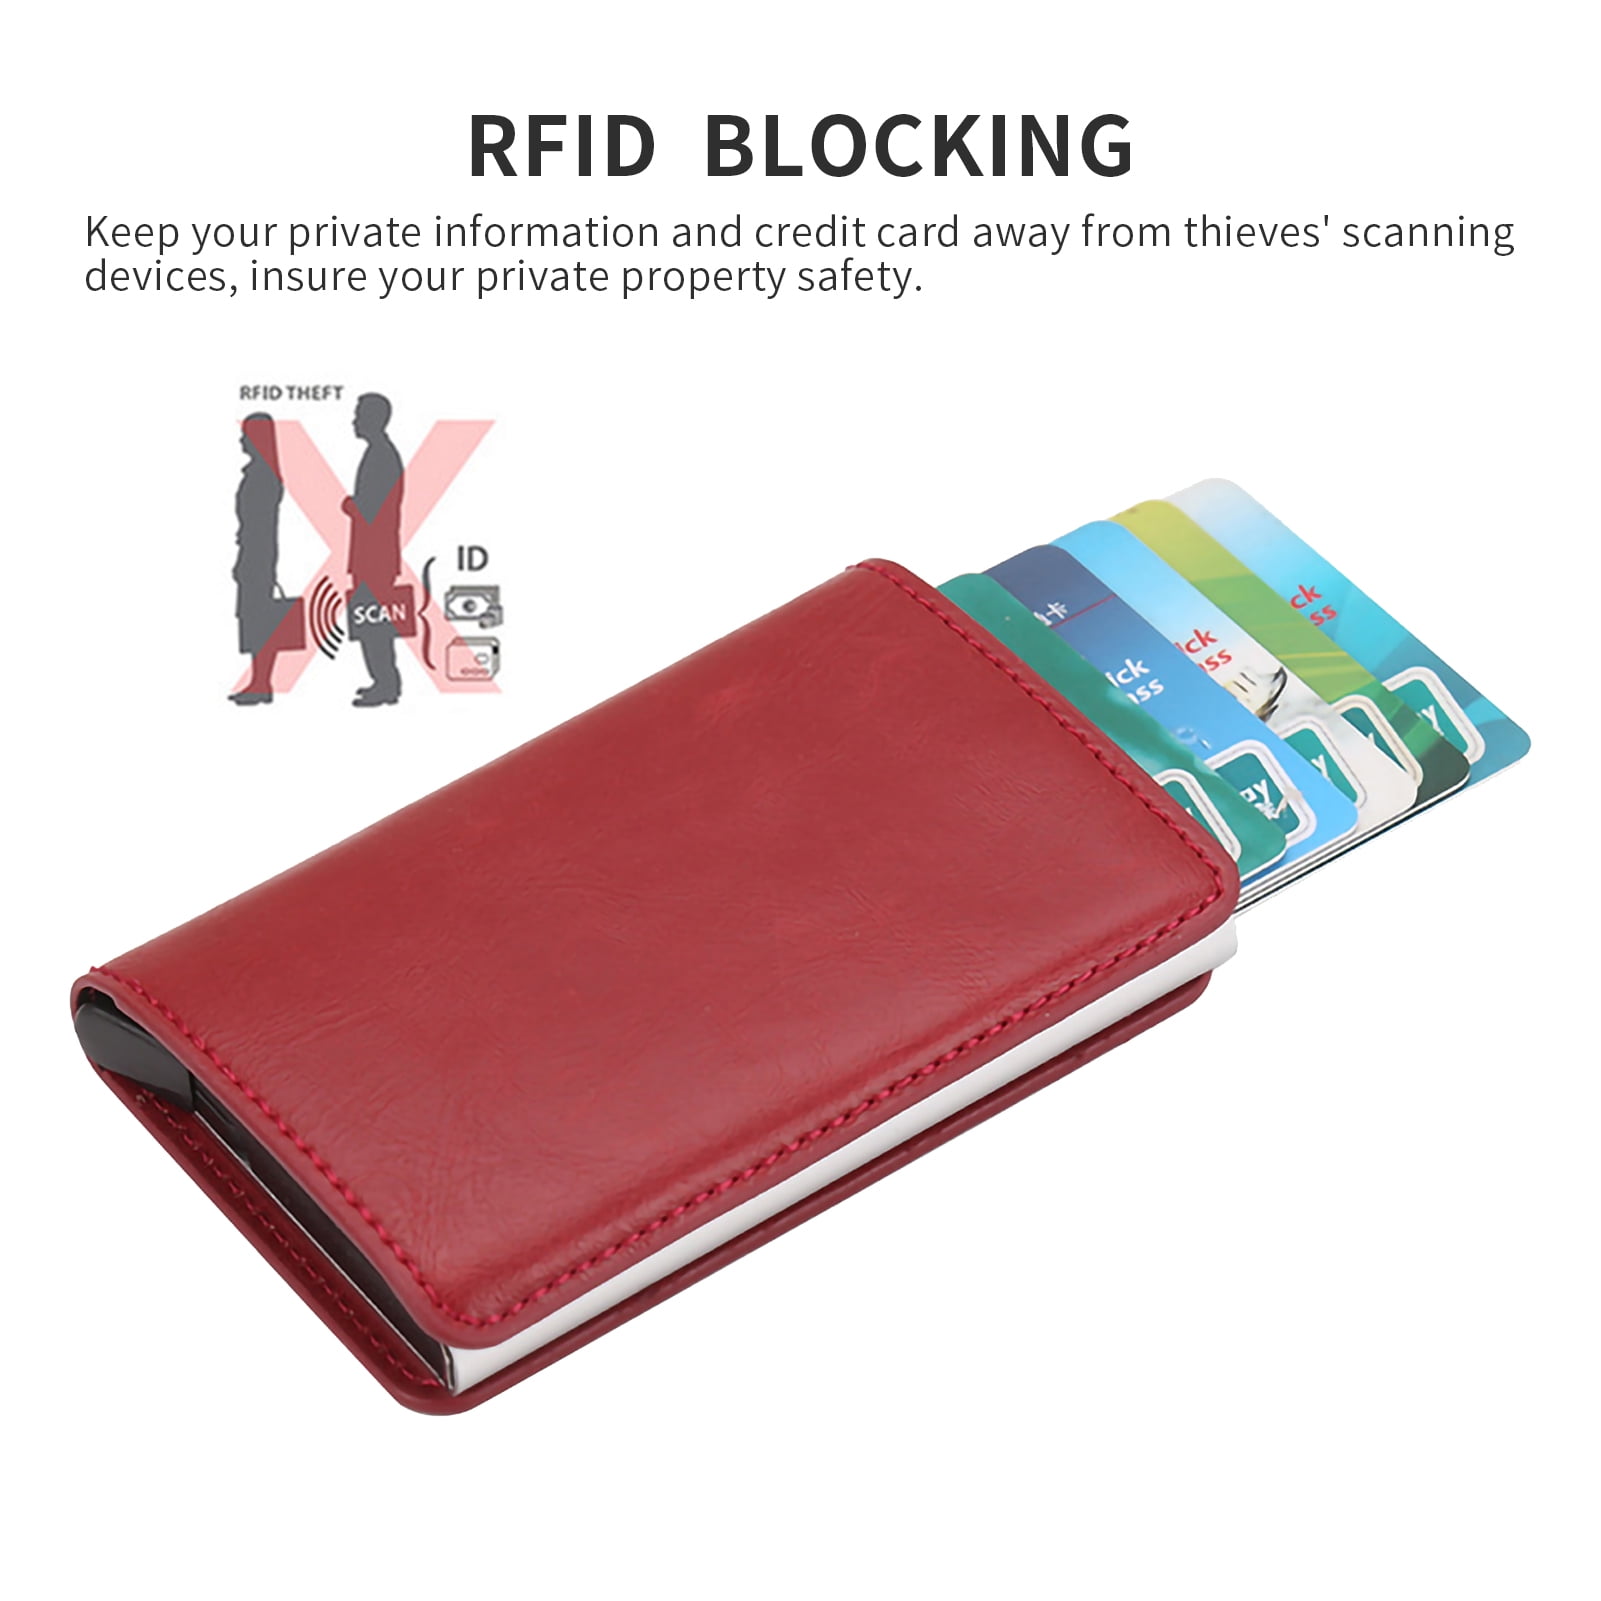 Credit Card Holder Wallet,2 Pieces RFID Blocking Credit Card Case,Stainless Steel Card Case,Business Card Case with 6 Compartments,Multifunctional Bank Card Case,for Men and Women,Travel and Work